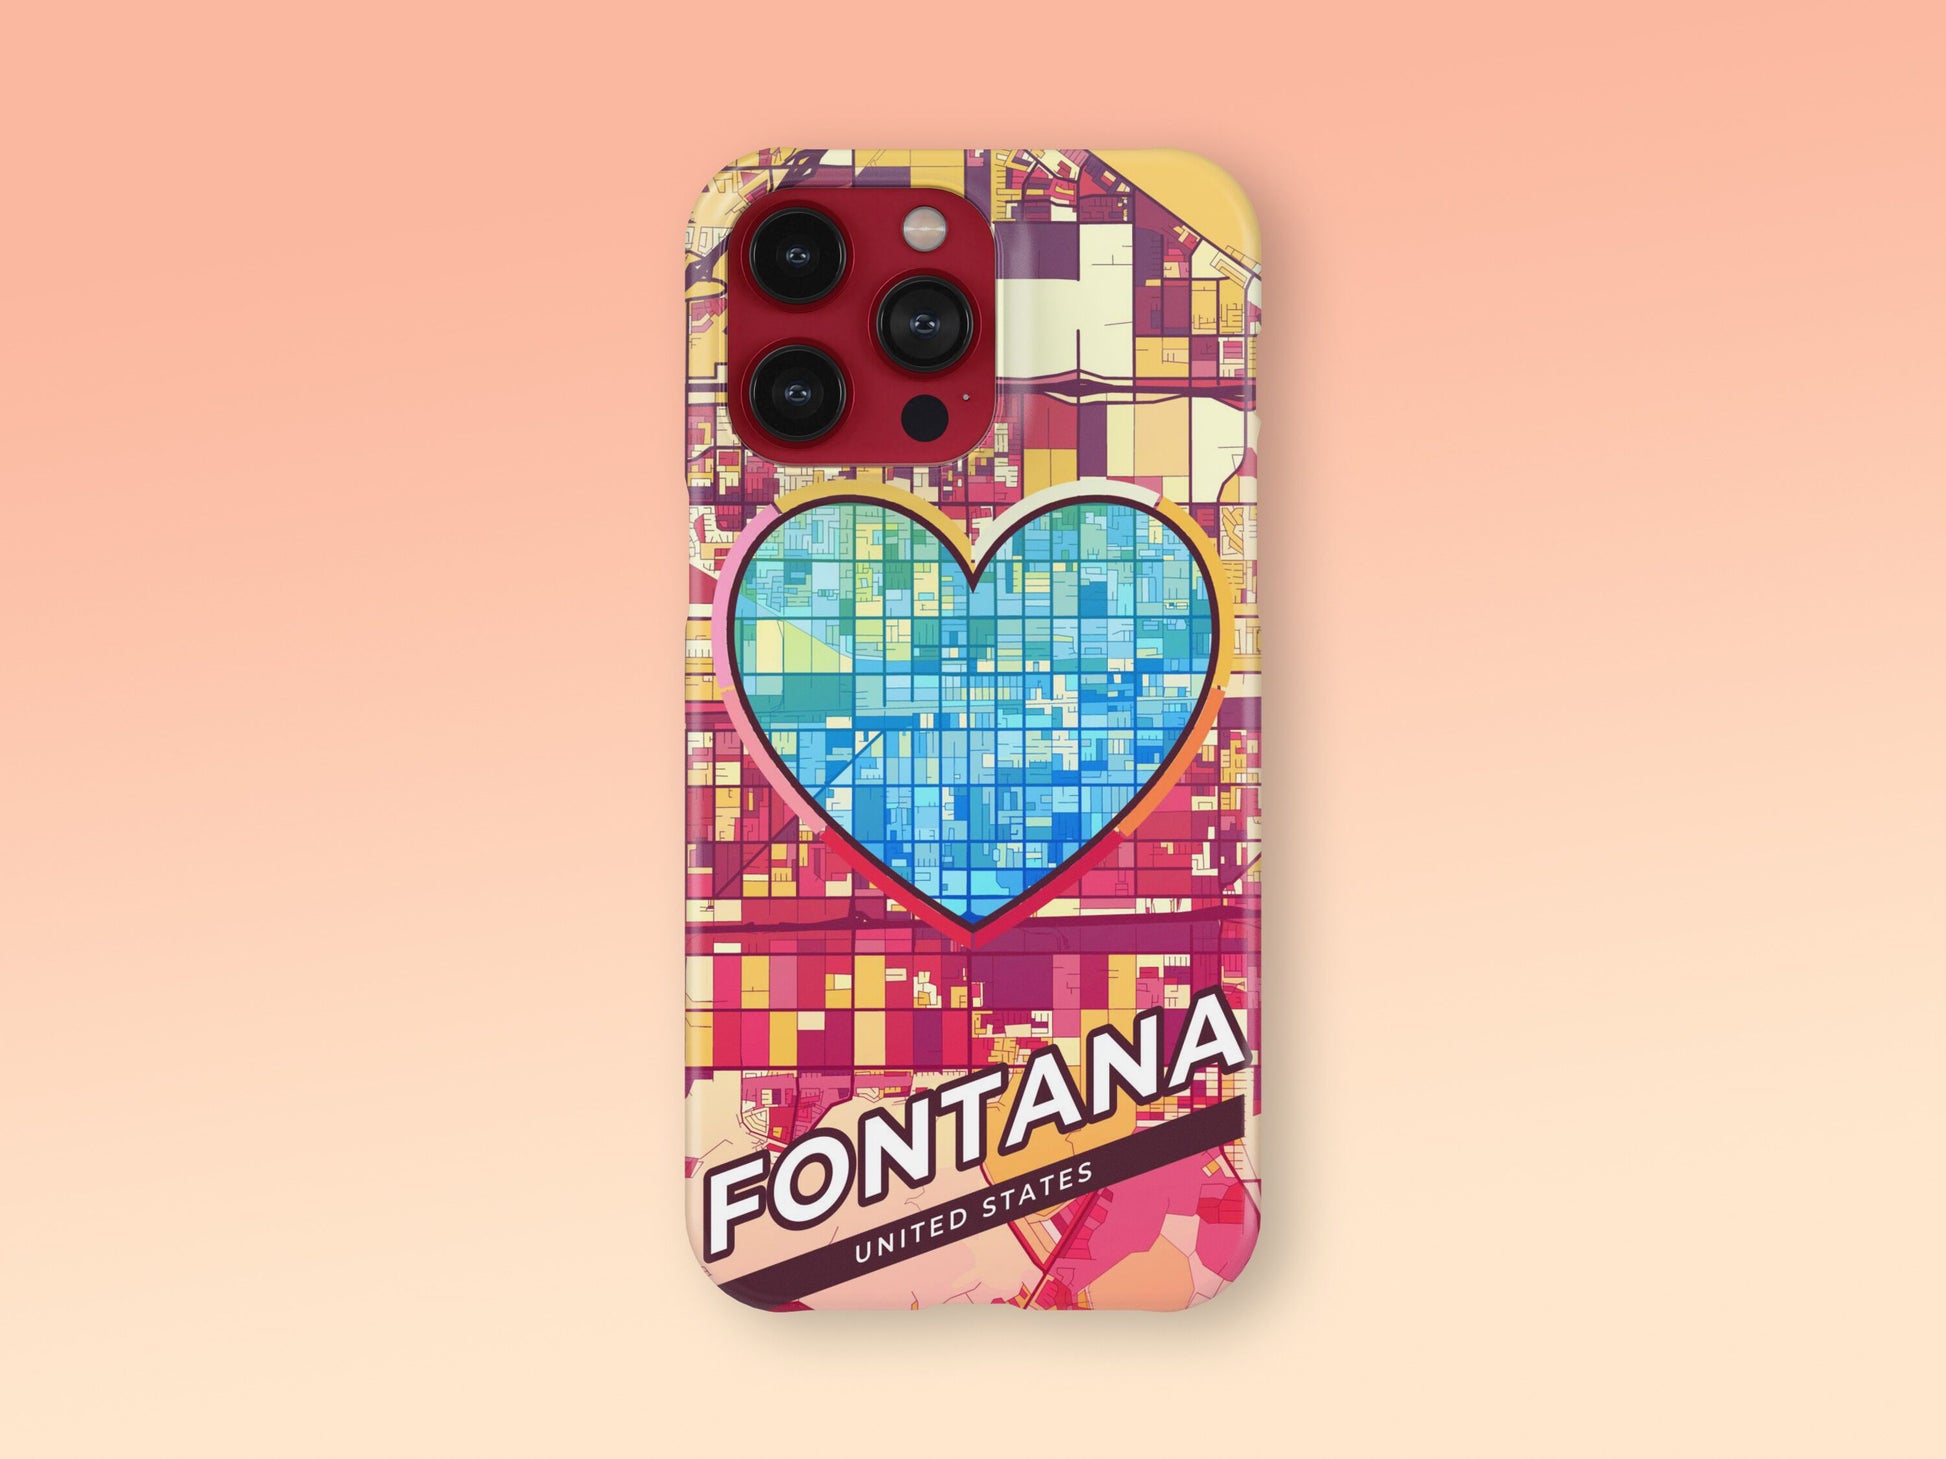 Fontana California slim phone case with colorful icon. Birthday, wedding or housewarming gift. Couple match cases. 2